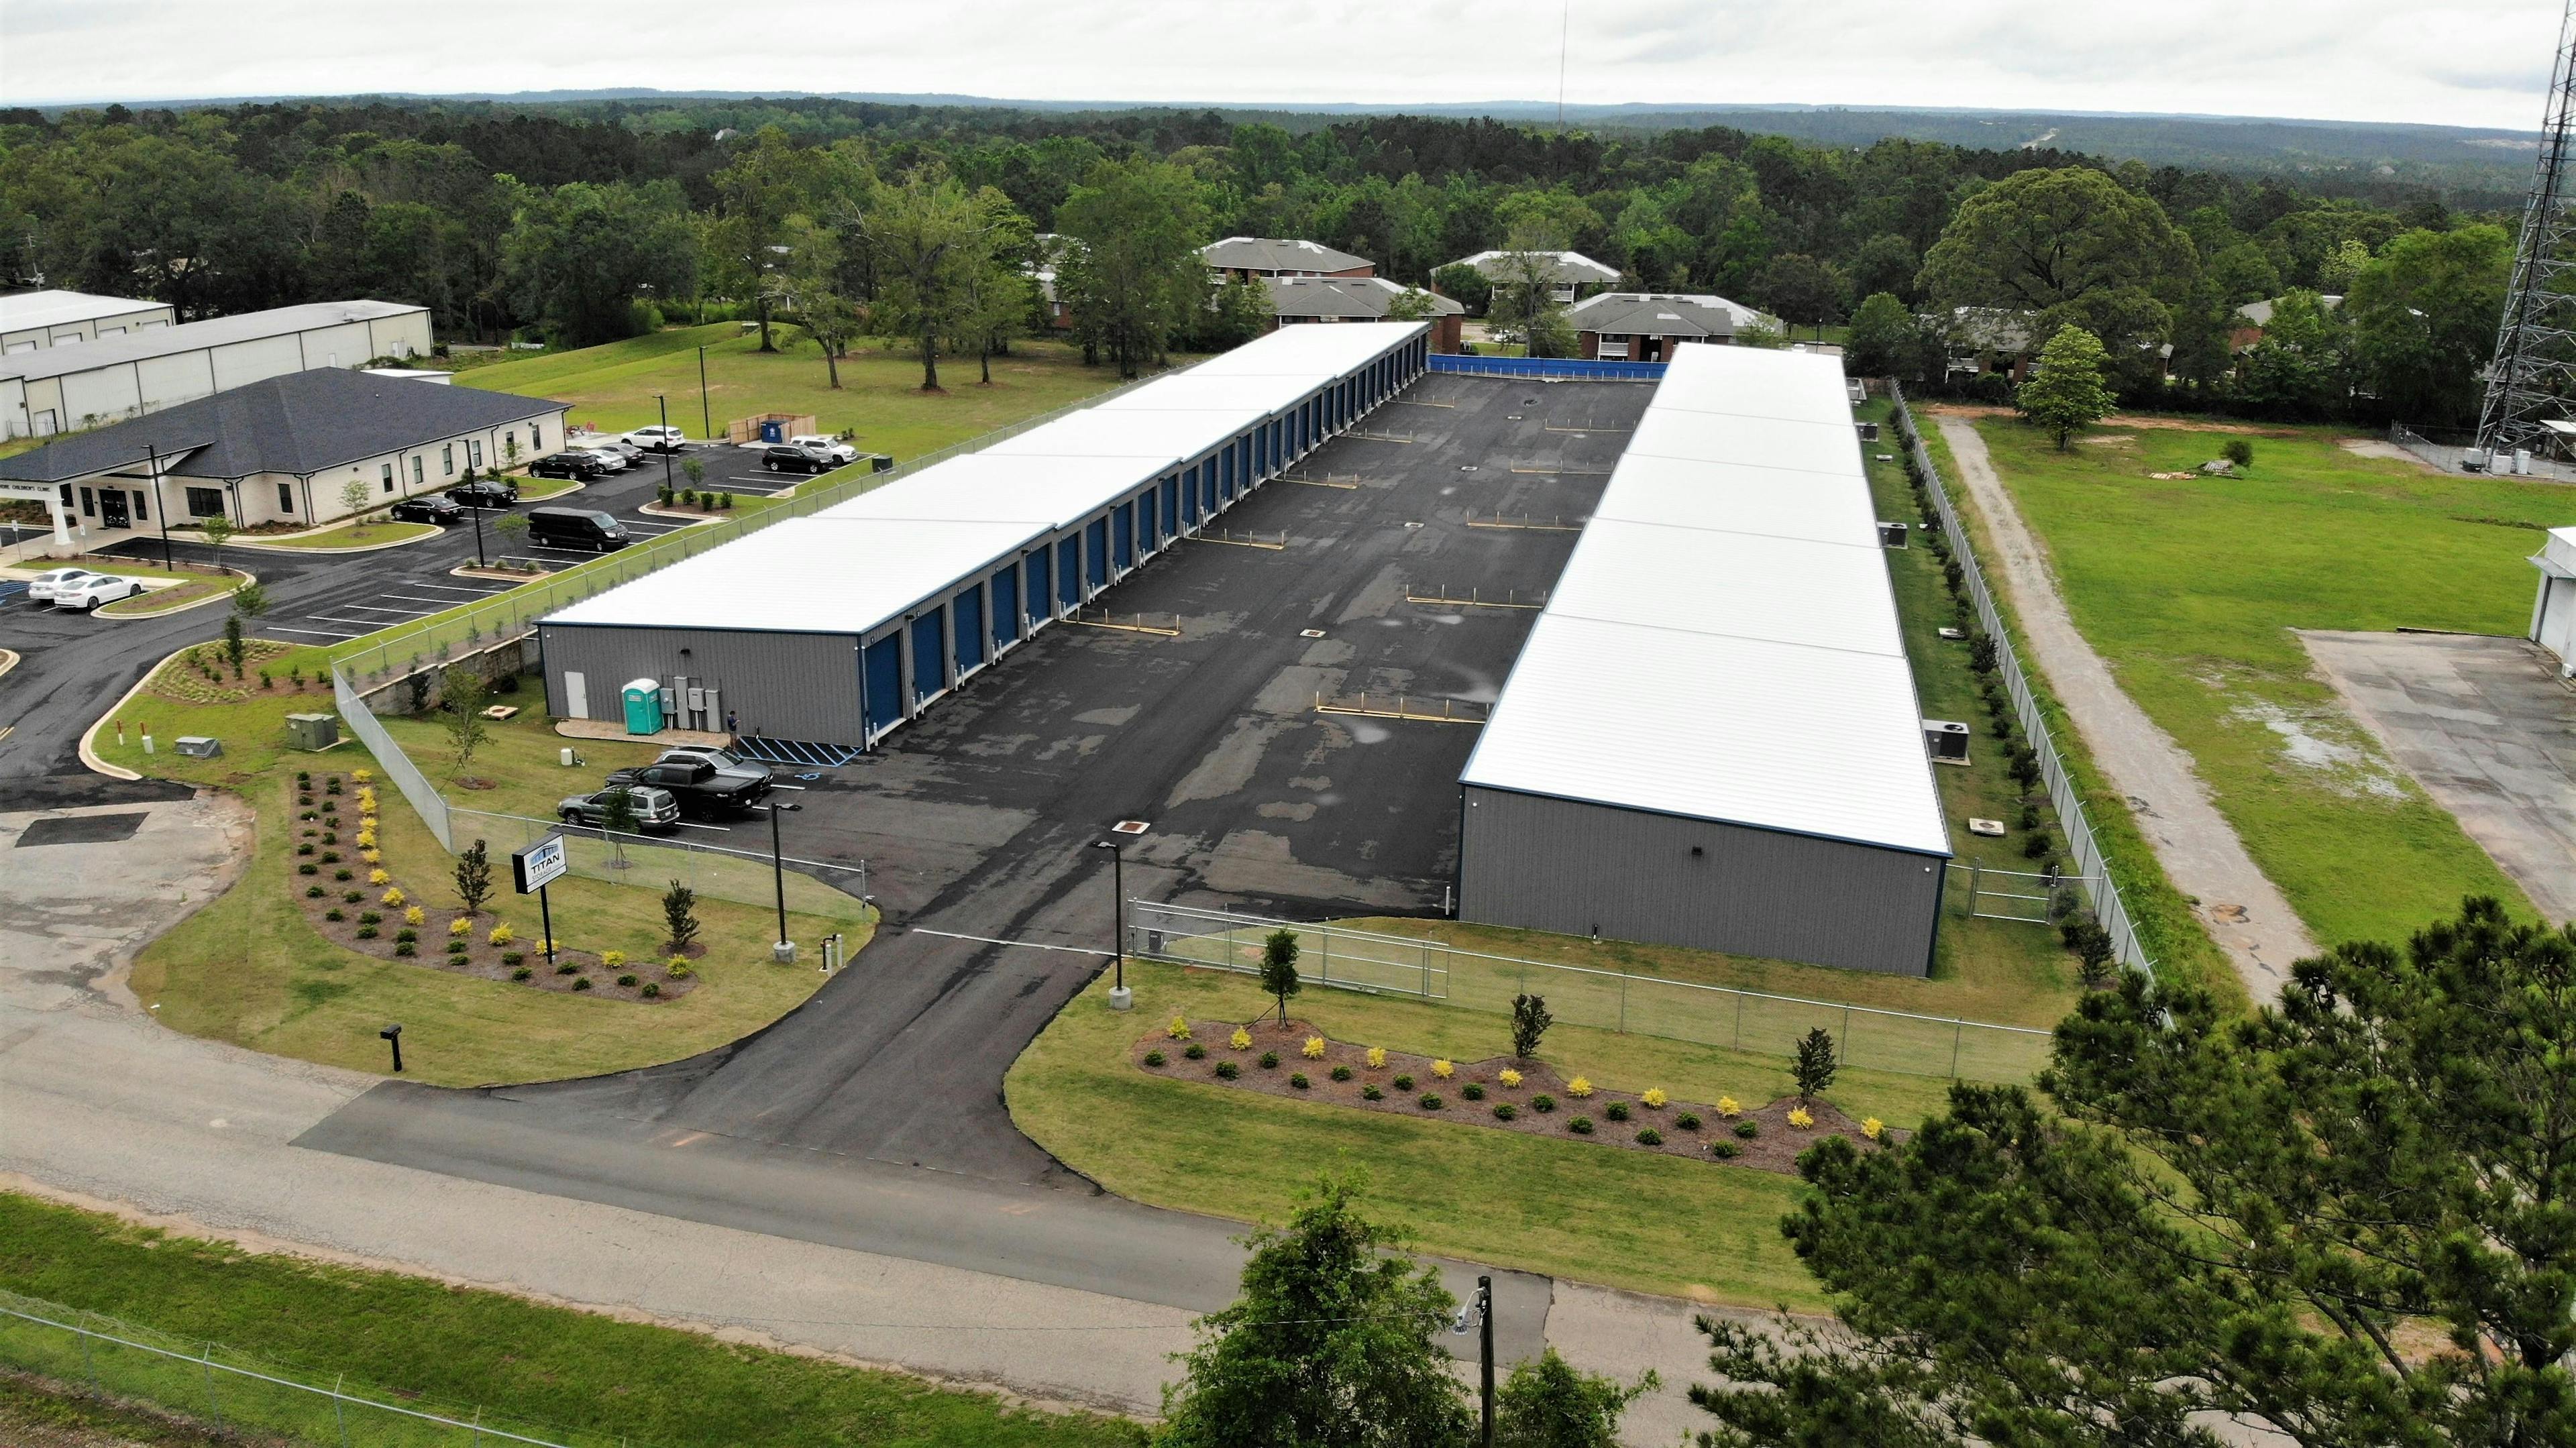 Overview of Spanish Fort Climate-Controlled Oversized Storage Facility showing wide driveway and large units